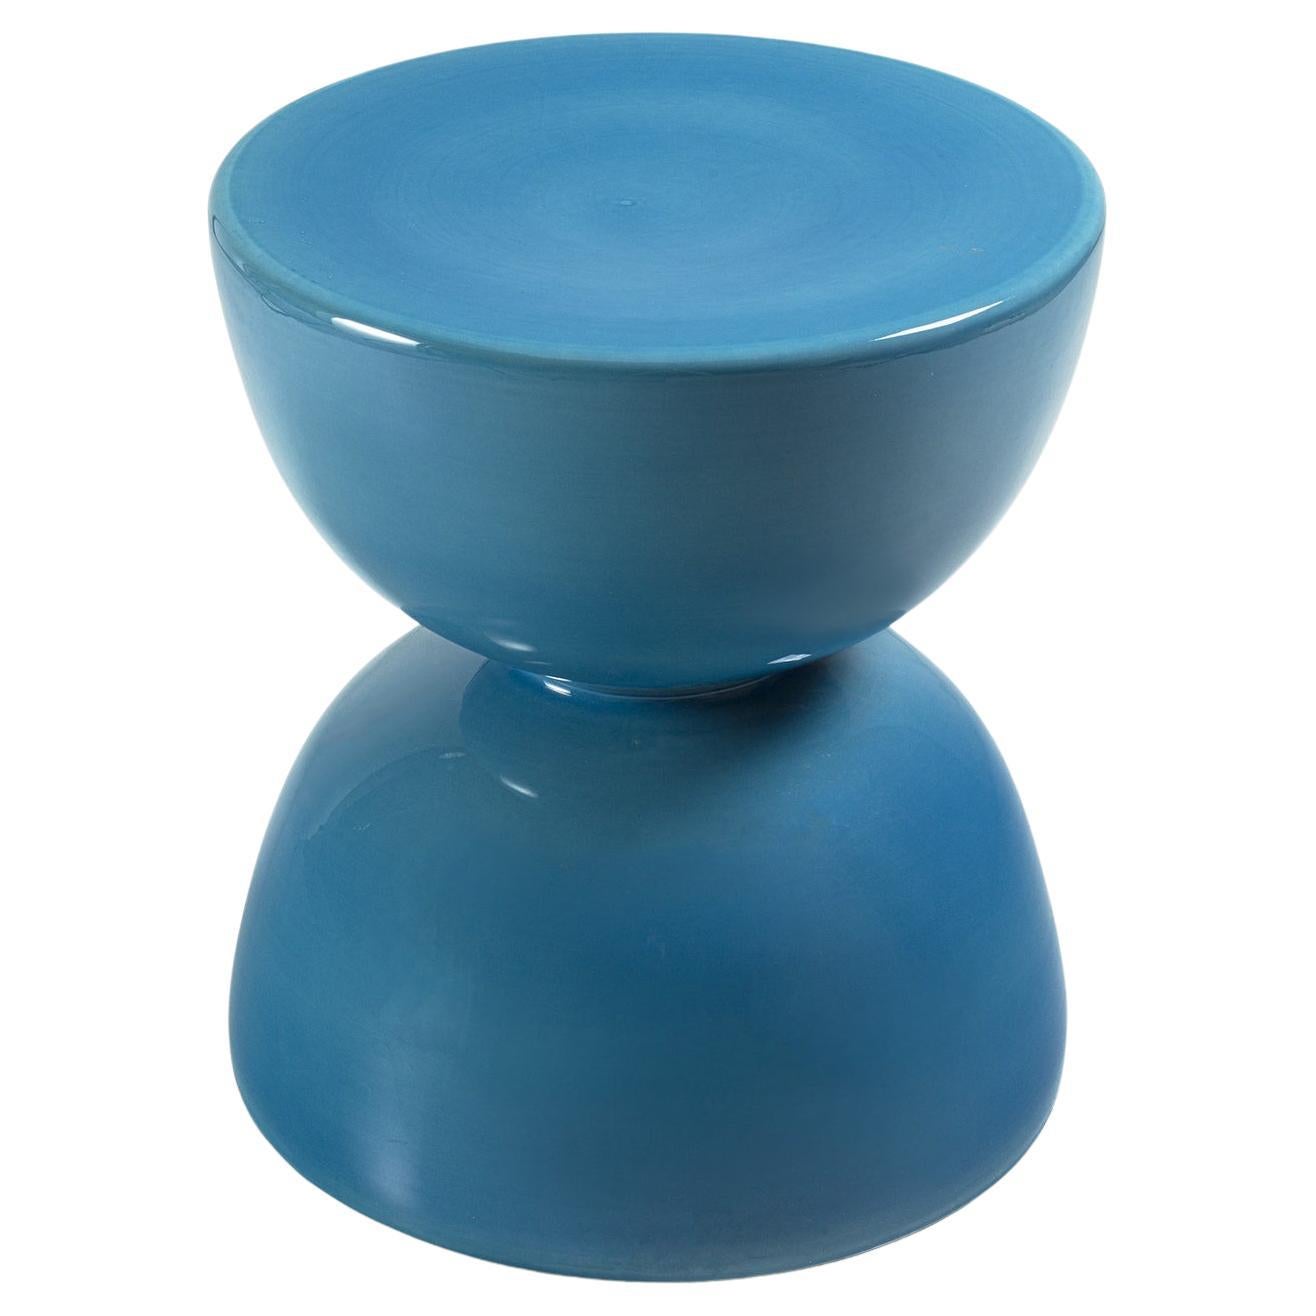 Spheres Blue Stool For Sale